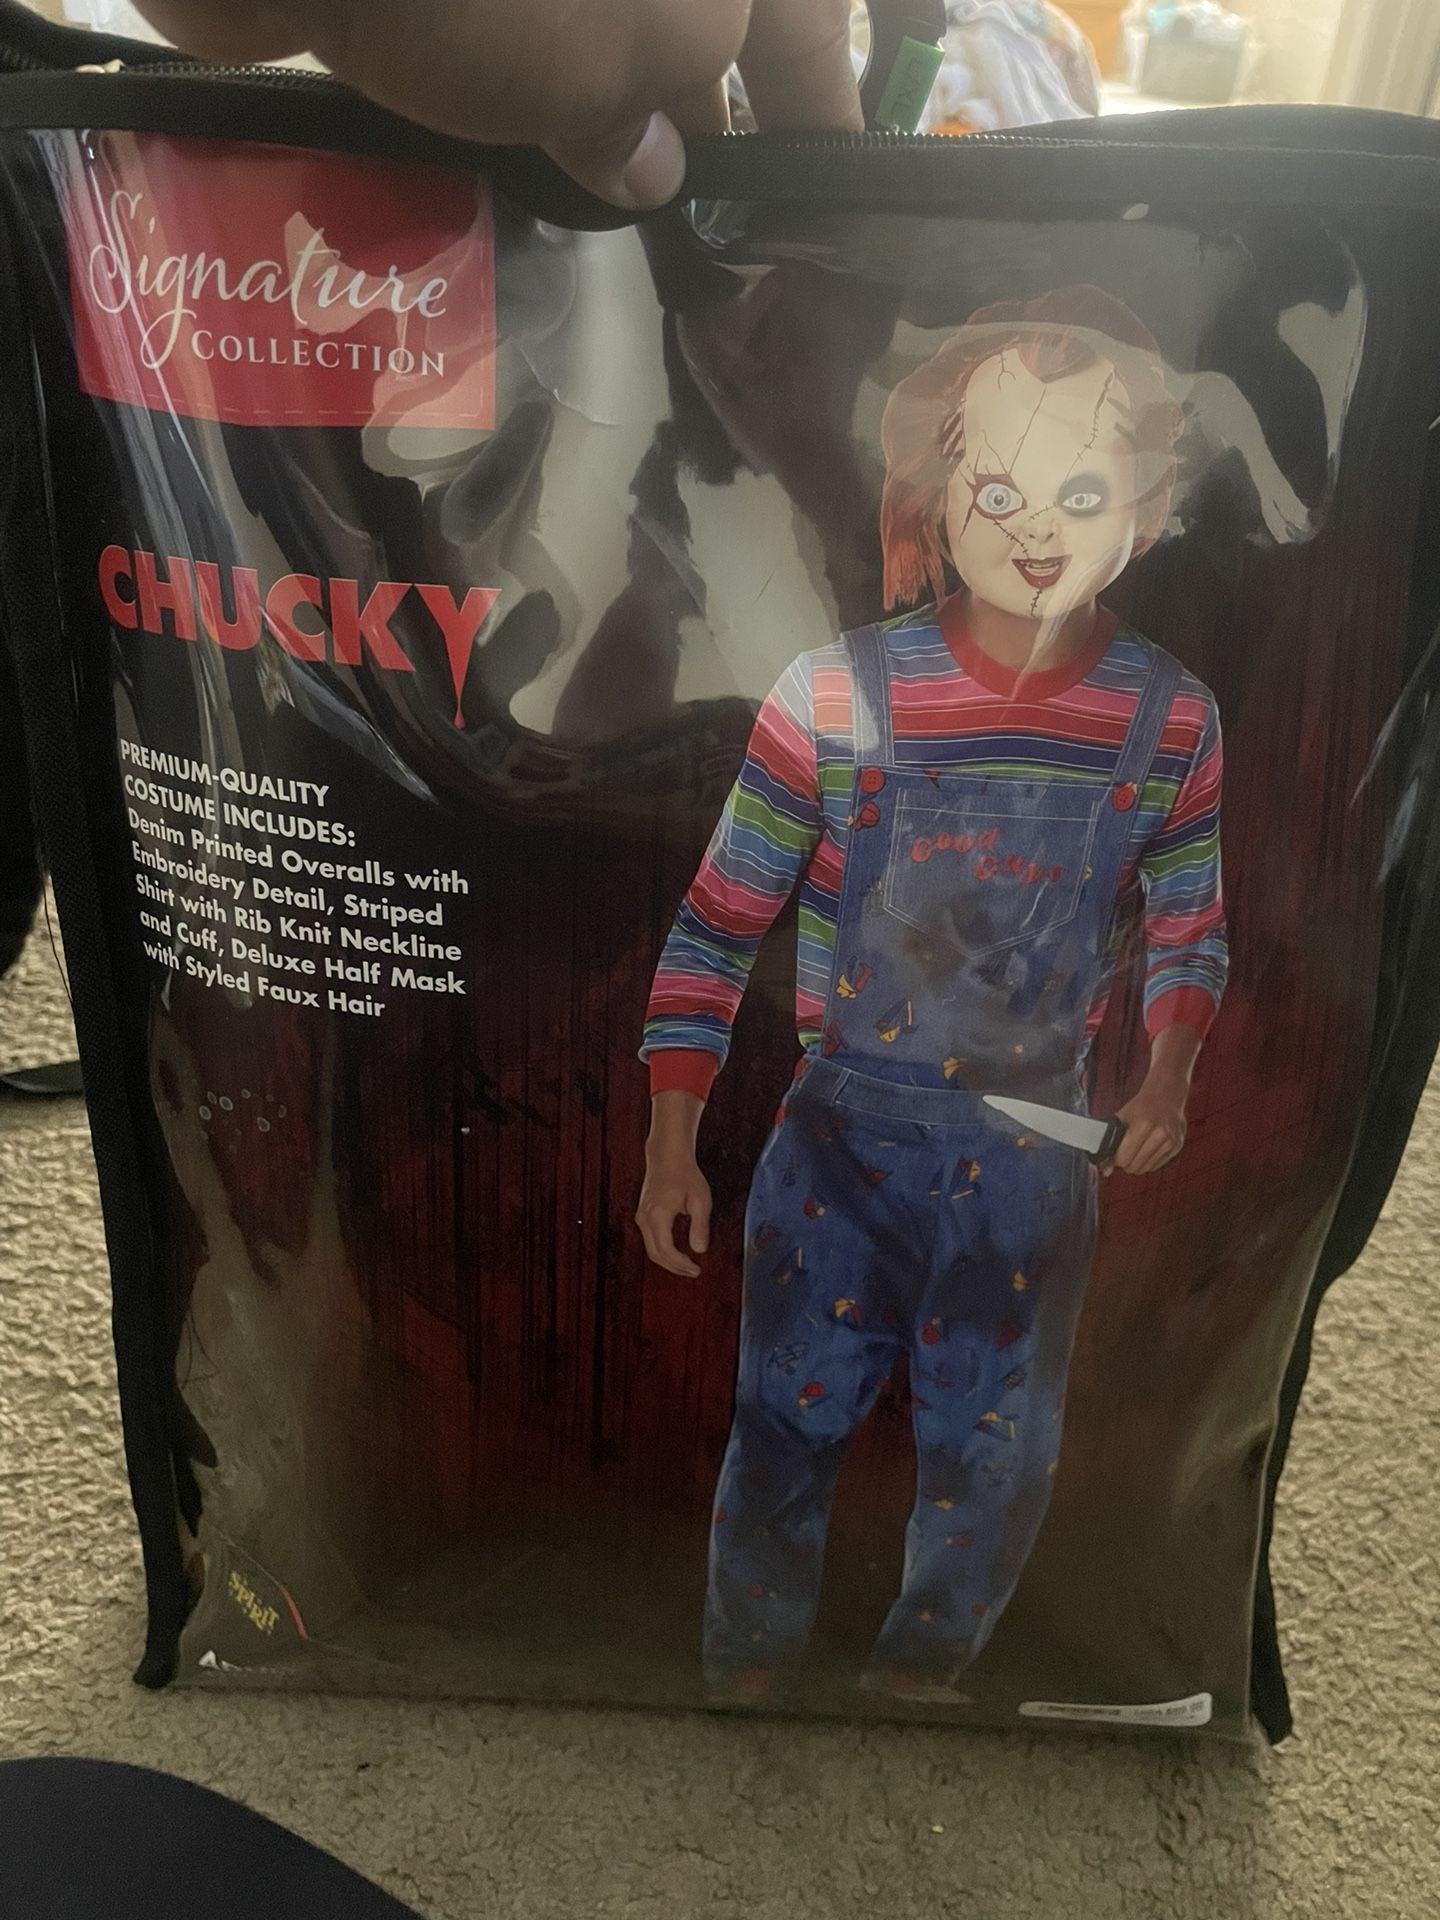 Signature Collection Chucky Costume